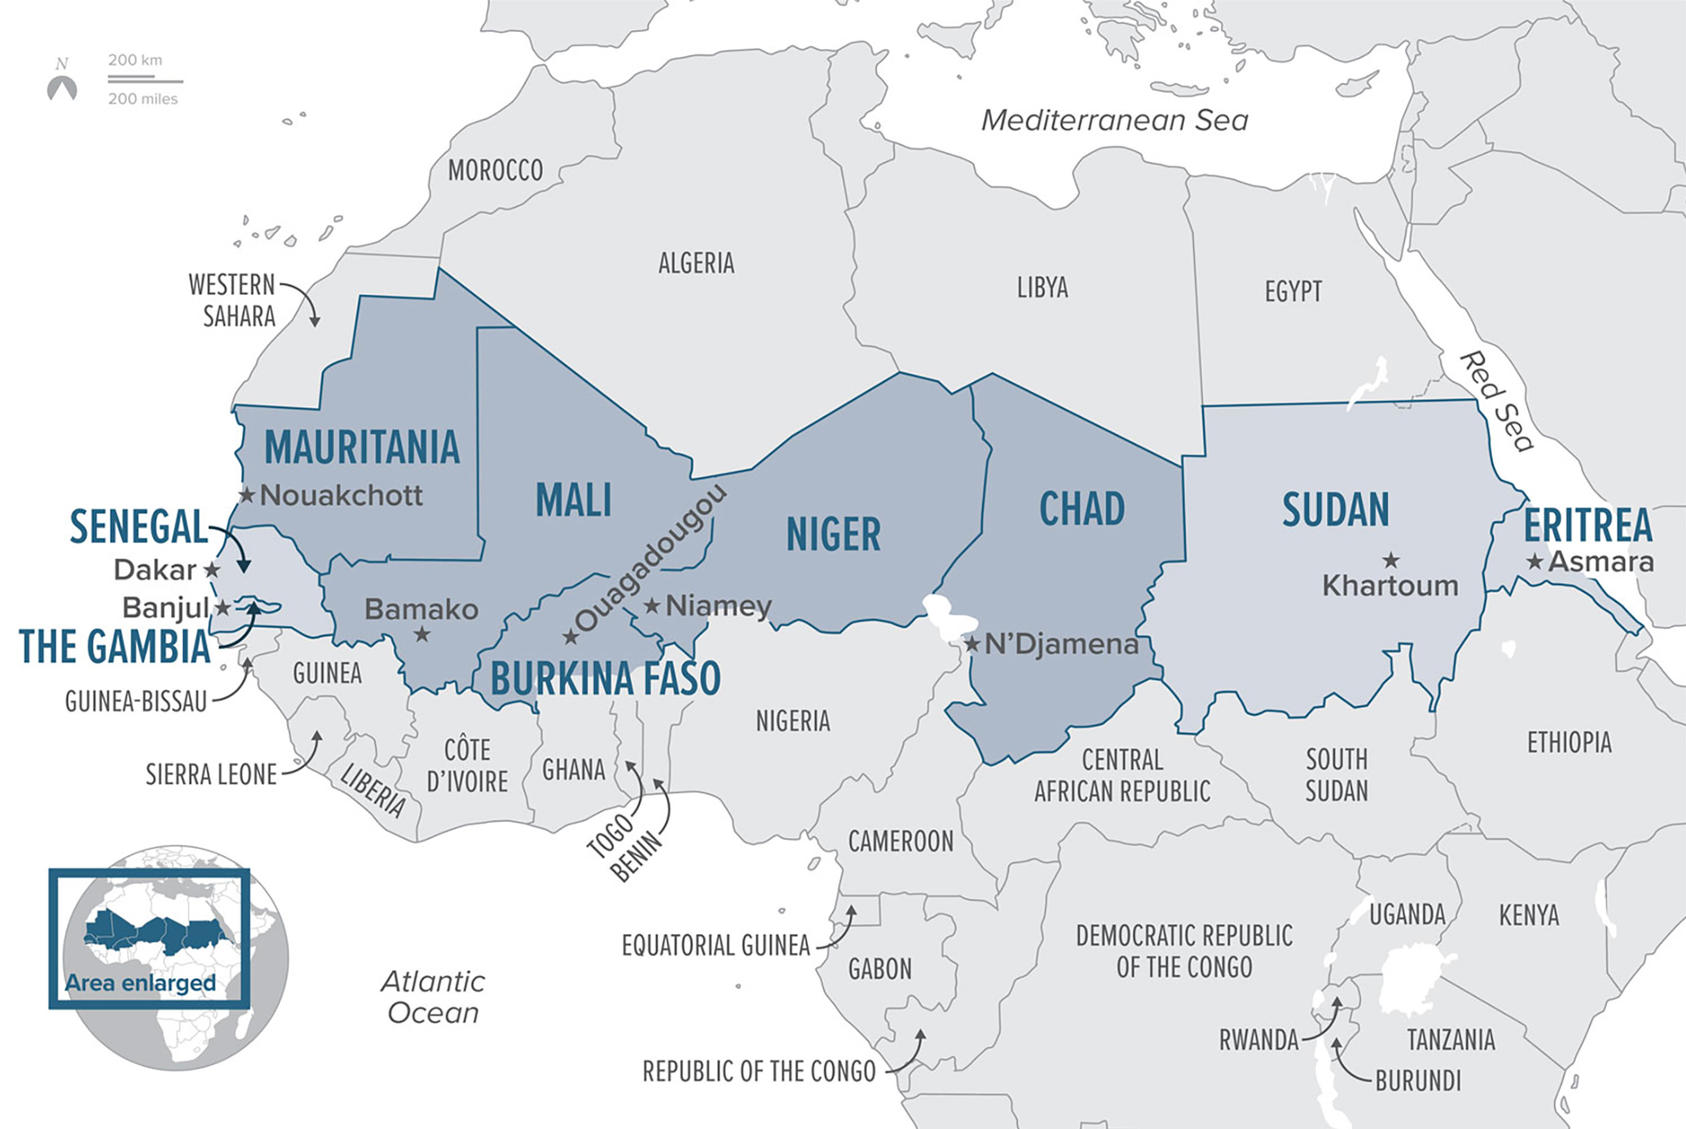 Map of the Sahel region (Source: Adapted from artwork by Rainer Lesniewski/Shutterstock)